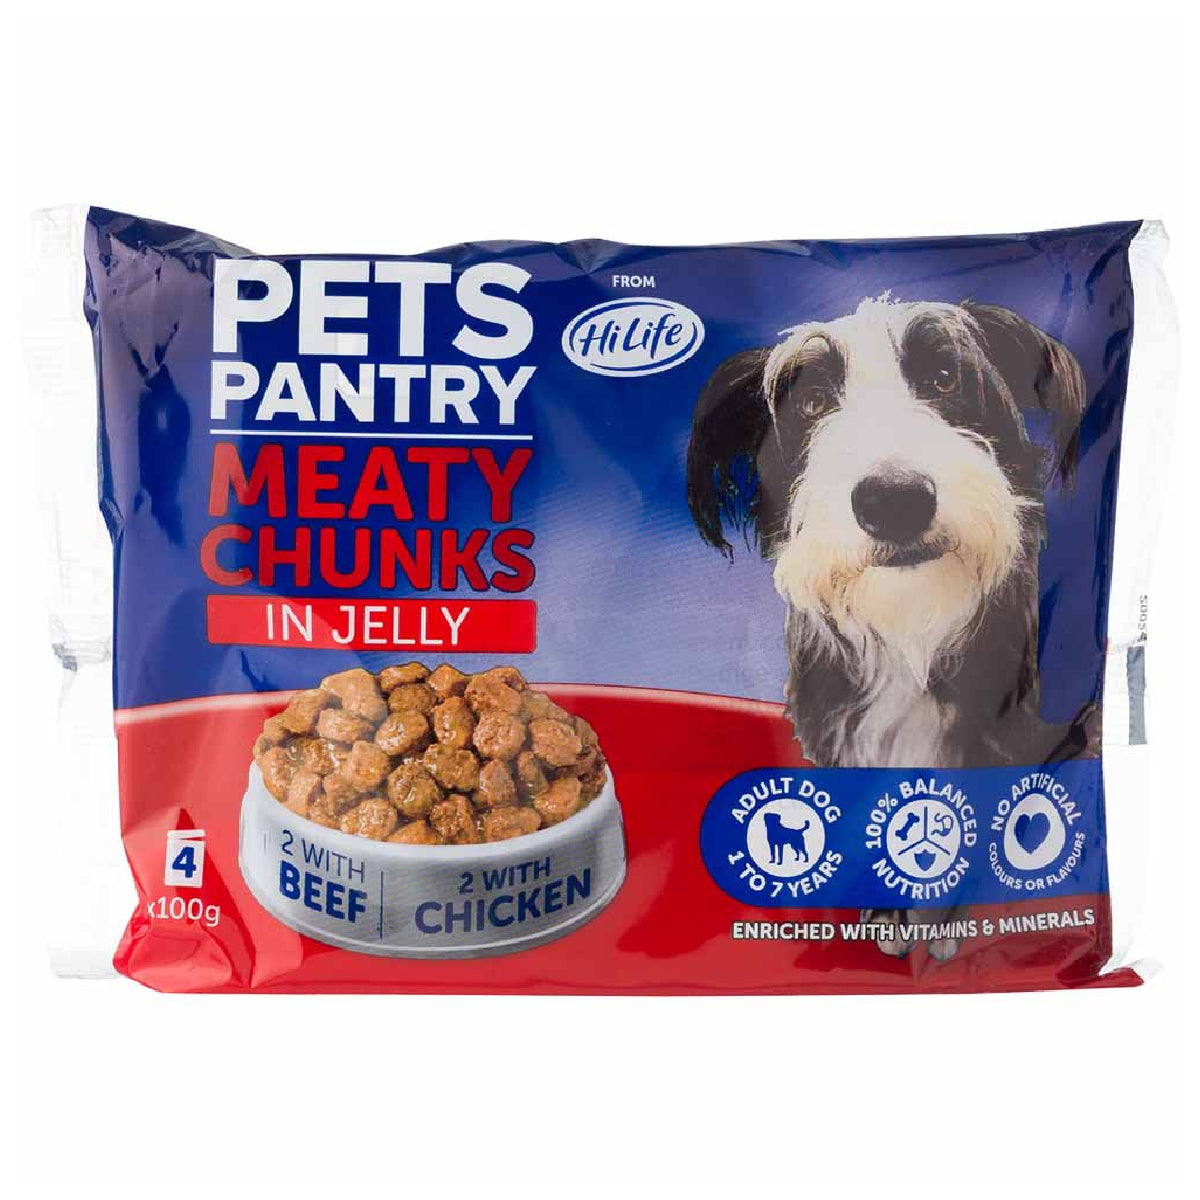 HiLife - Pets Pantry Meat and Jelly Dog Food Pouch - 4 x 100g - Continental Food Store